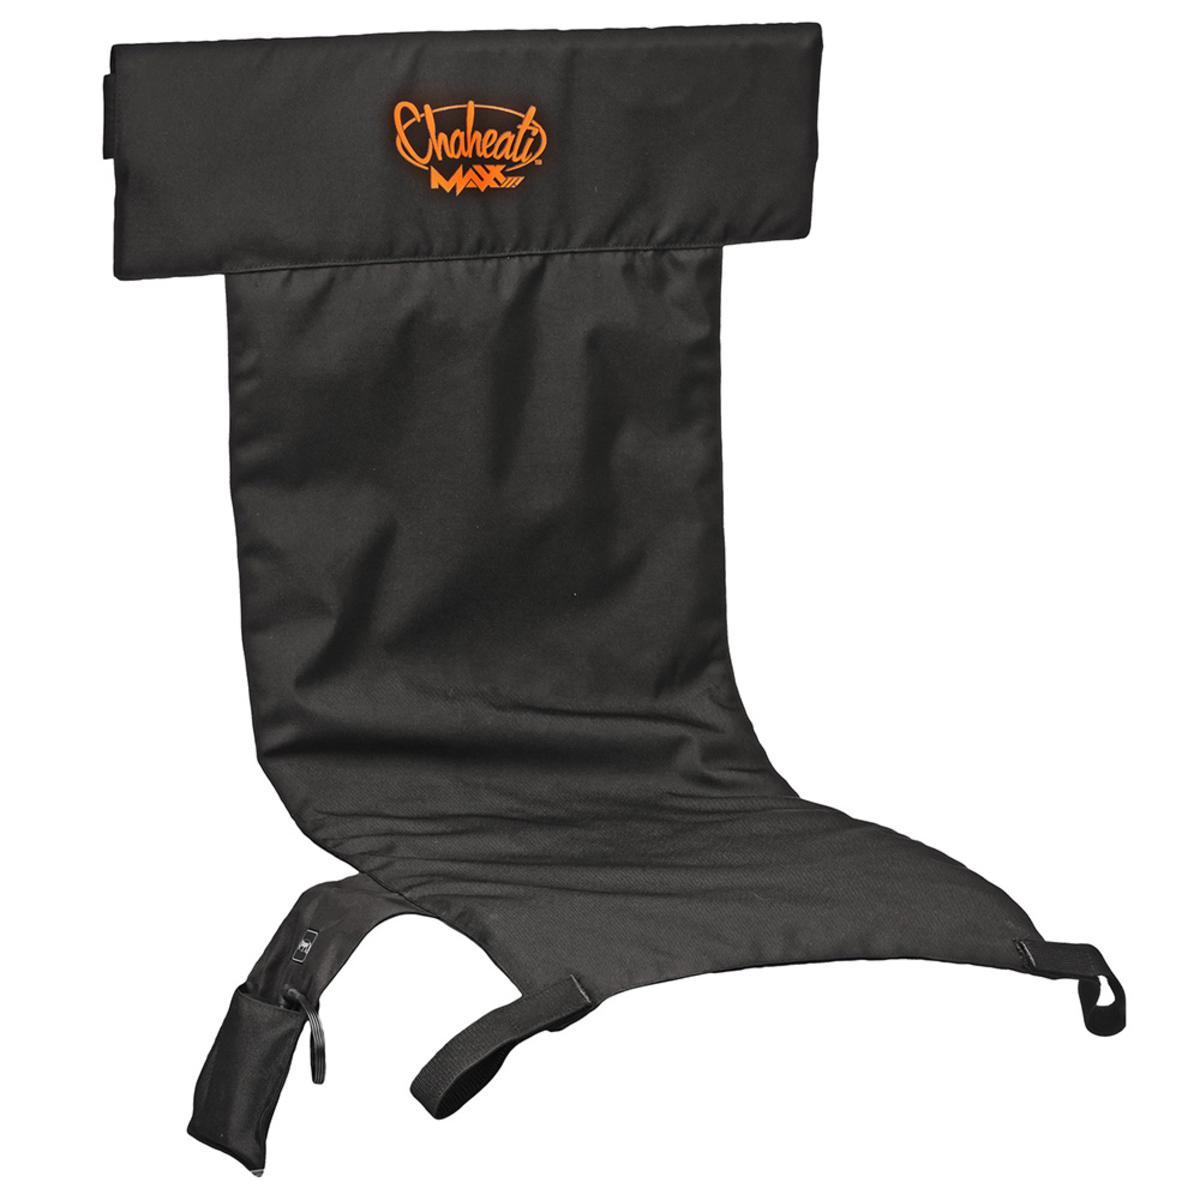 The Chaheati 11v battery maxx chair cover is the perfect, portable, comfortable solution for outdoor events